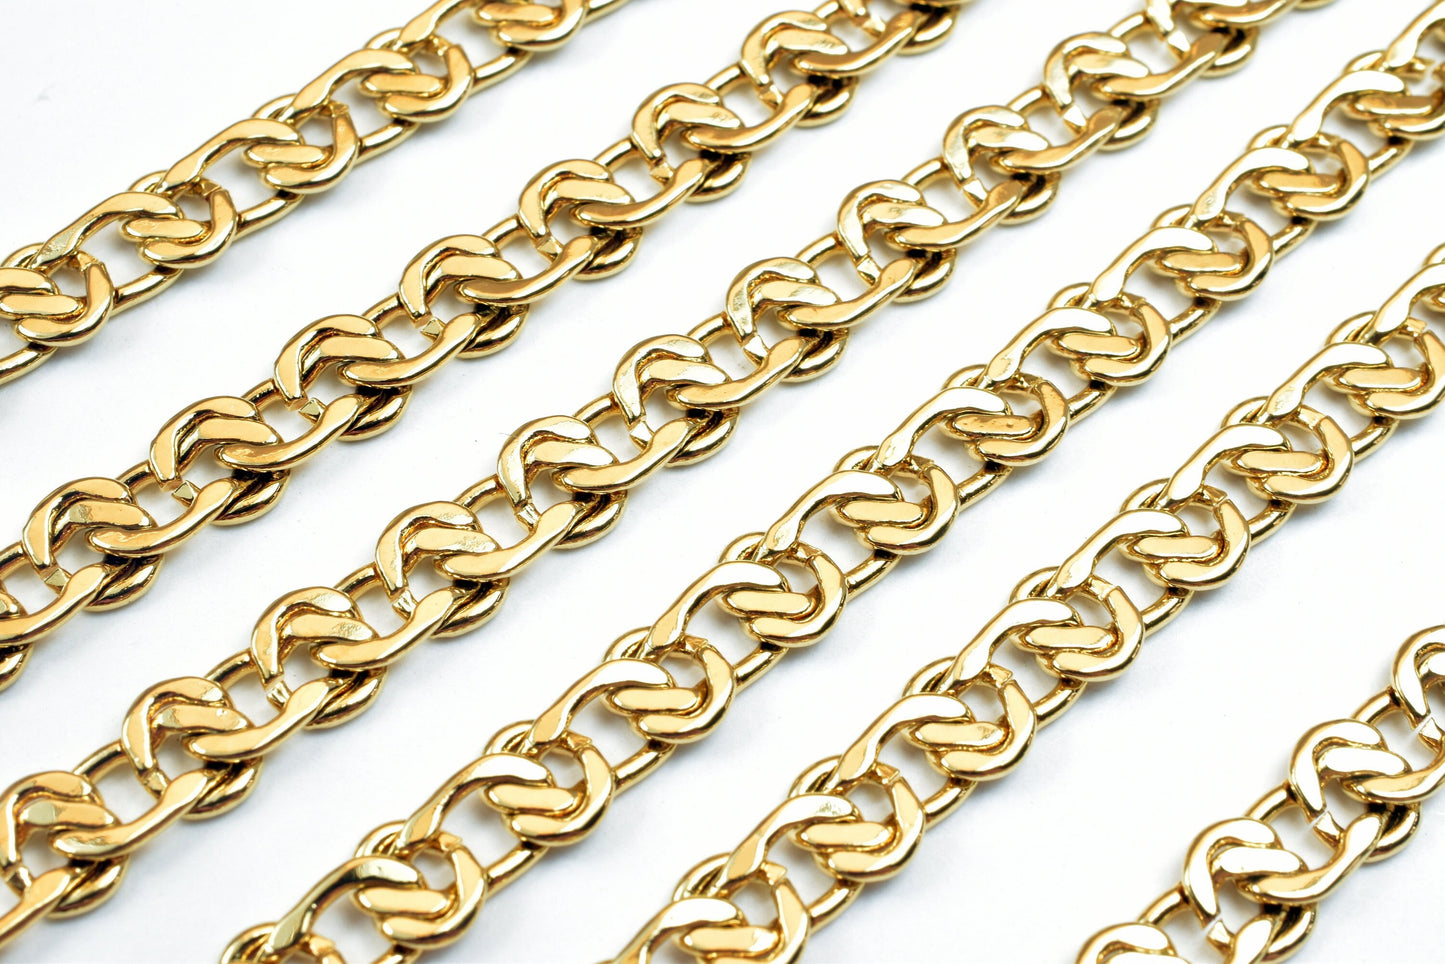 18k gold filled EP link chain 19 1/2" inch long, 6mm width, 2mm thickness gold filled findings chain for jewelry making cg497